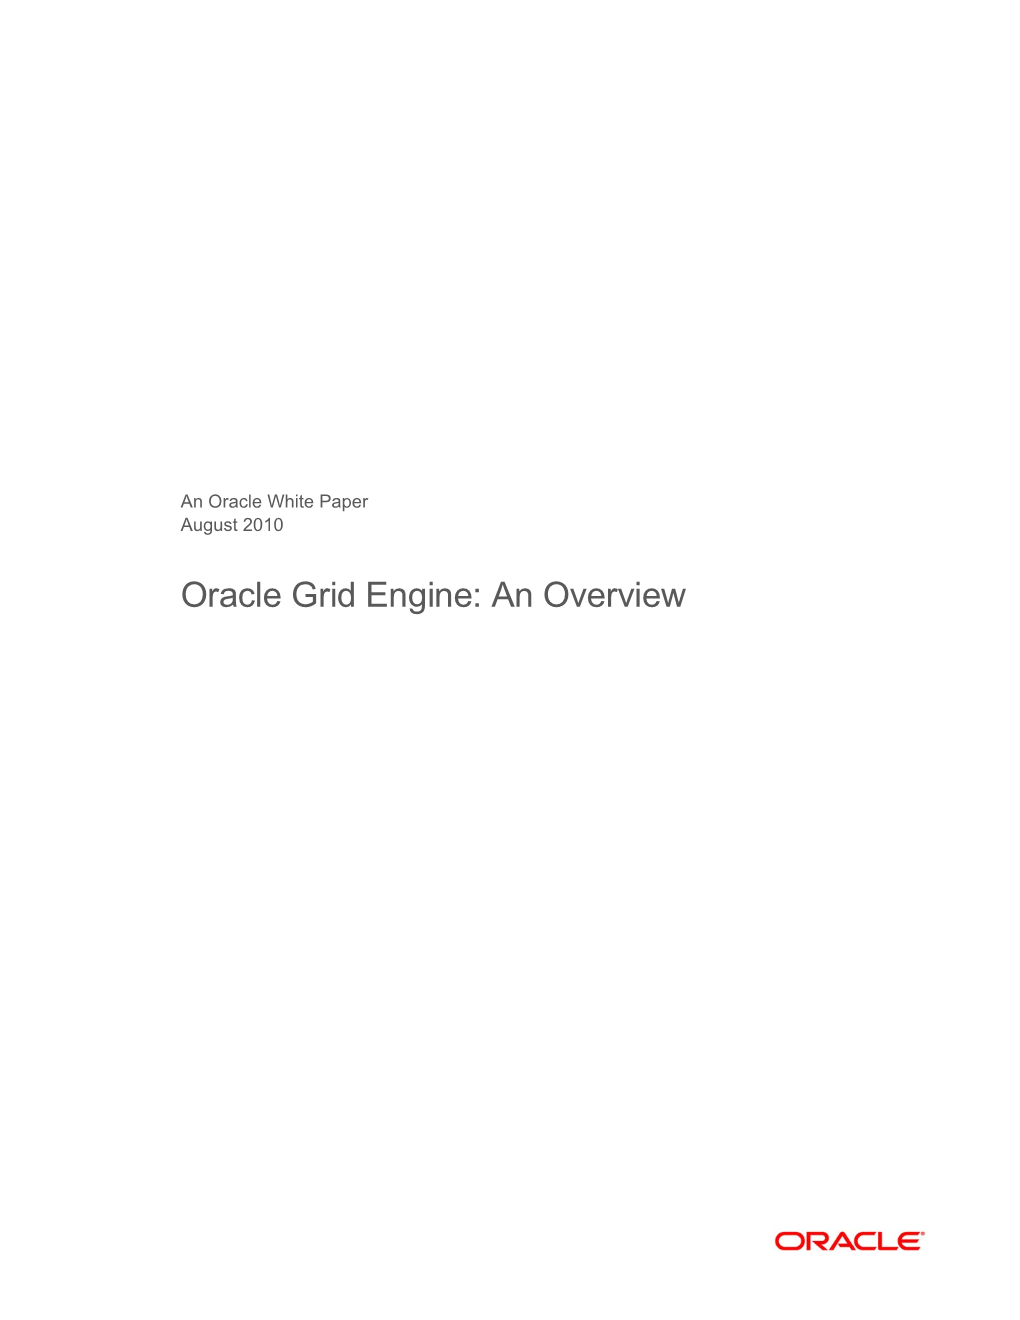 Oracle Grid Engine: an Overview